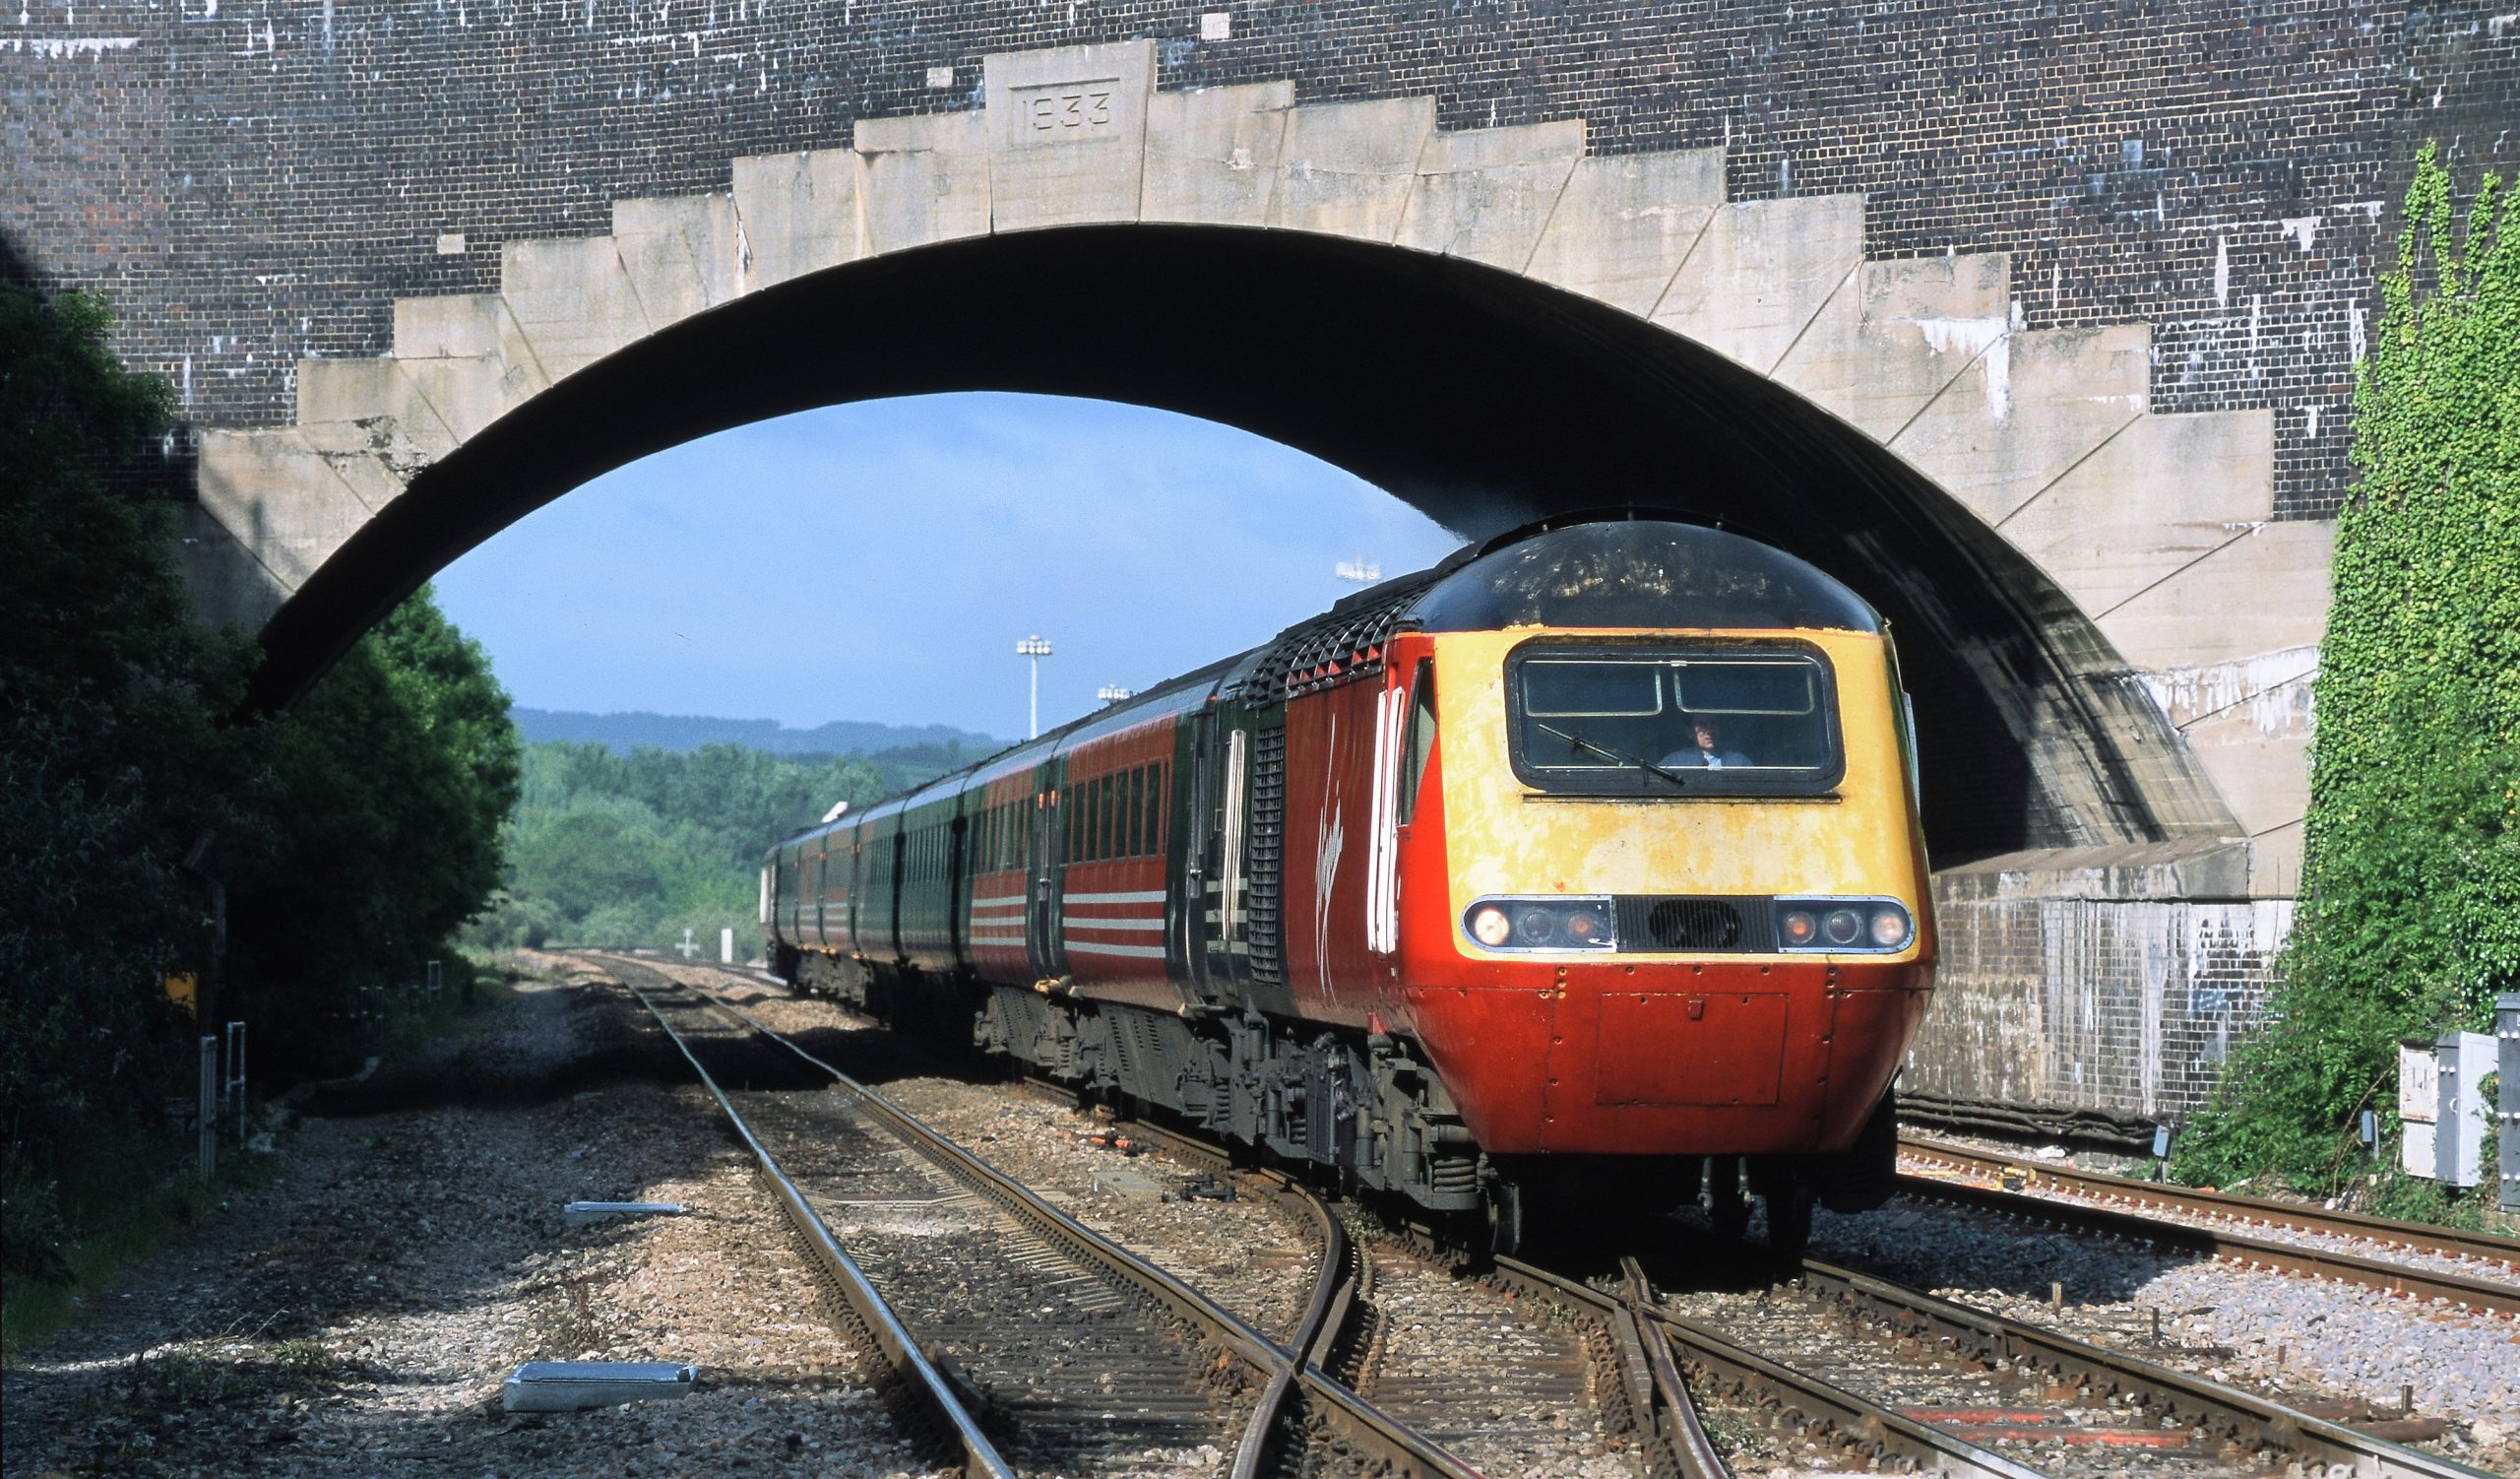 Headed by power car 43086, the 06.20 Plymouth to Newcastle 'Armada’ passes beneath the A38 road bridge at Parson Street on 31st May 2002.
The bridge was rebuilt in 1933 as part of a scheme to widen the railway through Bristol, which included construction of the platforms on the eastern side of Temple Meads outside the main overall roof.  Image credit: Stewart Jolly
